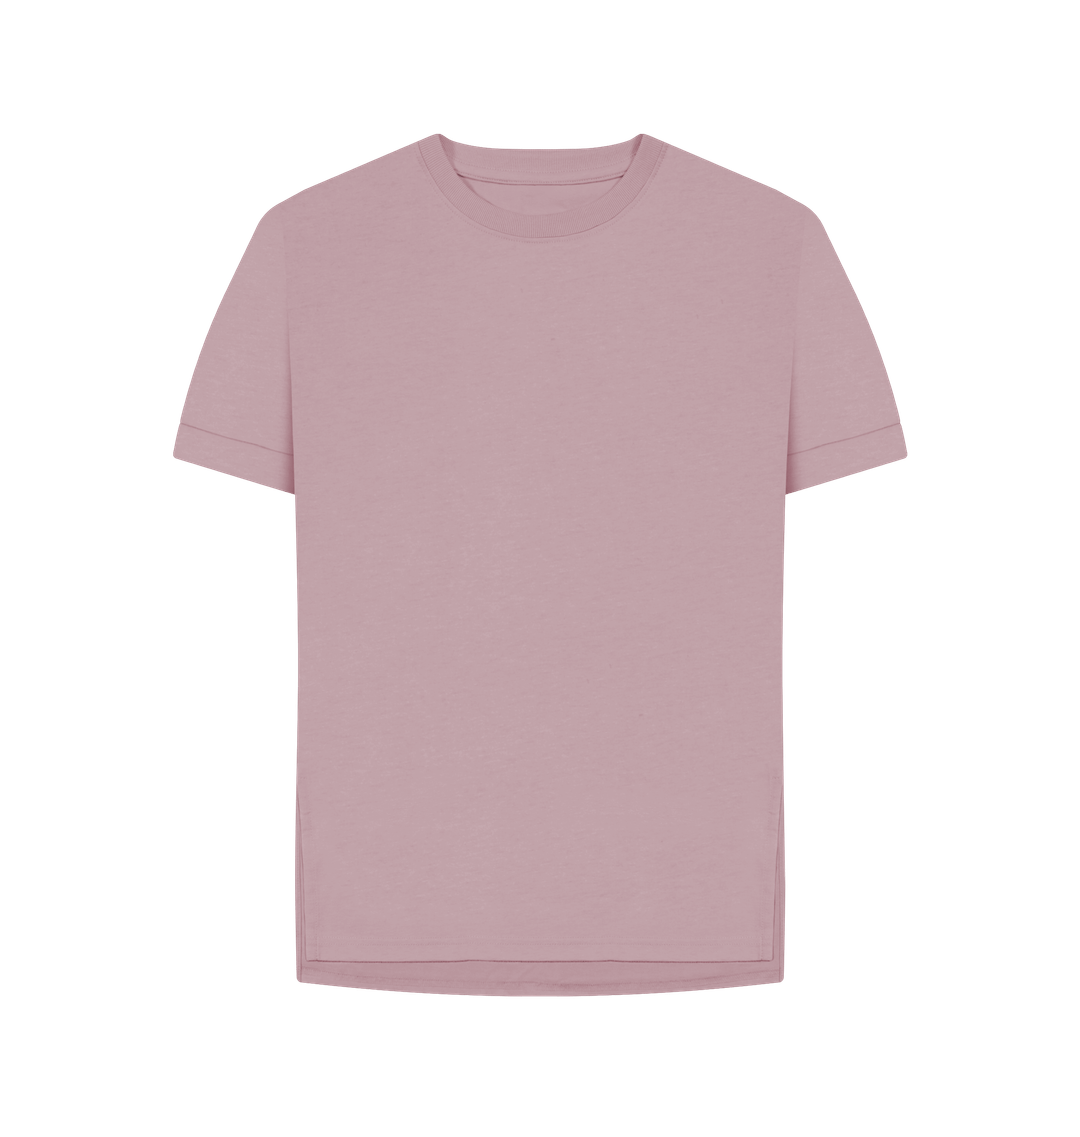 Relaxed Fit T - shirt - Printed T - shirt